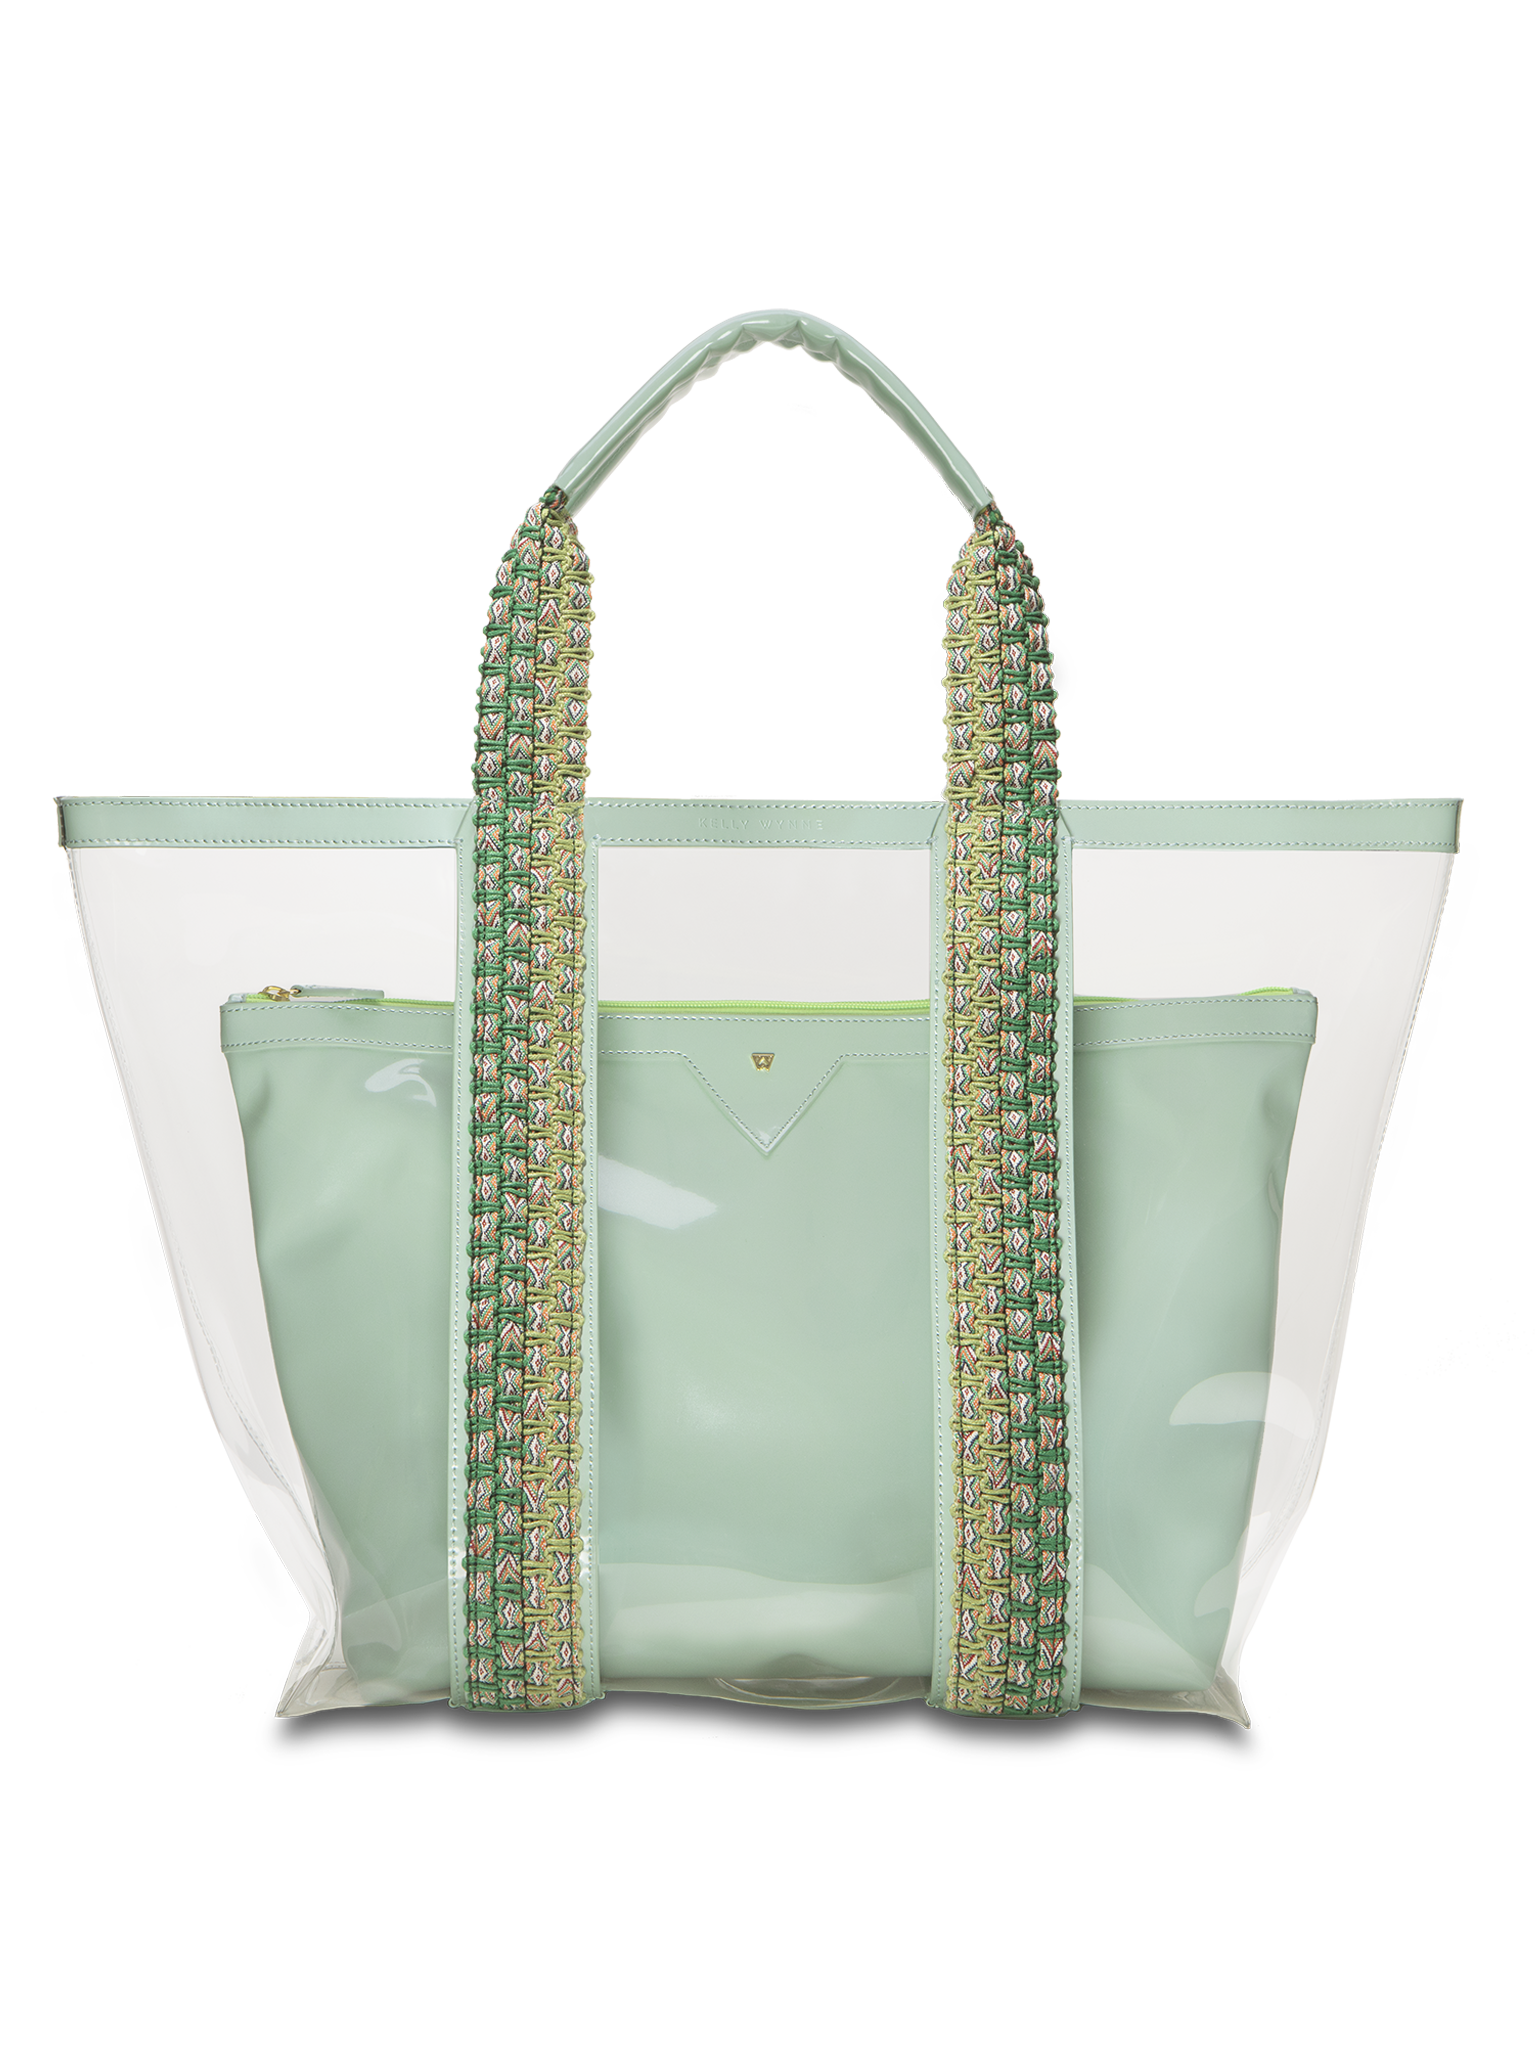 Water resistant, high-quality beach bag. Exterior tote in clear, interior patent leather pouch in Seafoam 